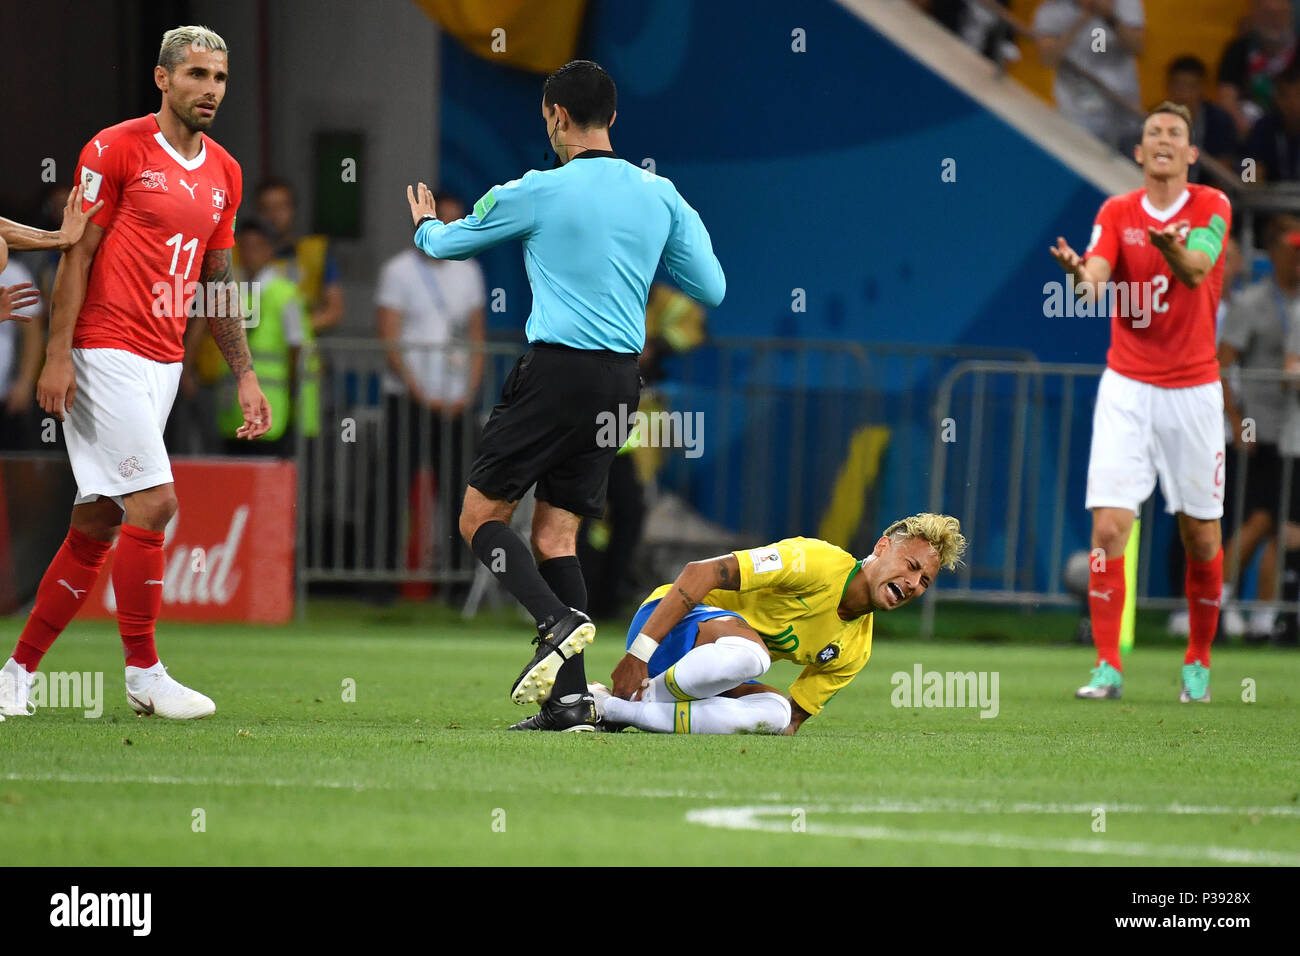 NEYMAR (BRA) comes down with pain, action, foul, left: Valon BEHRAMI (SUI). Brazil (BRA) -Switzerland (SUI) 1-1, Preliminary Round, Group E, match 09, on 17.06.2018 in Rostov-on-Don, Rostov Arena. Football World Cup 2018 in Russia from 14.06. - 15.07.2018. | usage worldwide Stock Photo